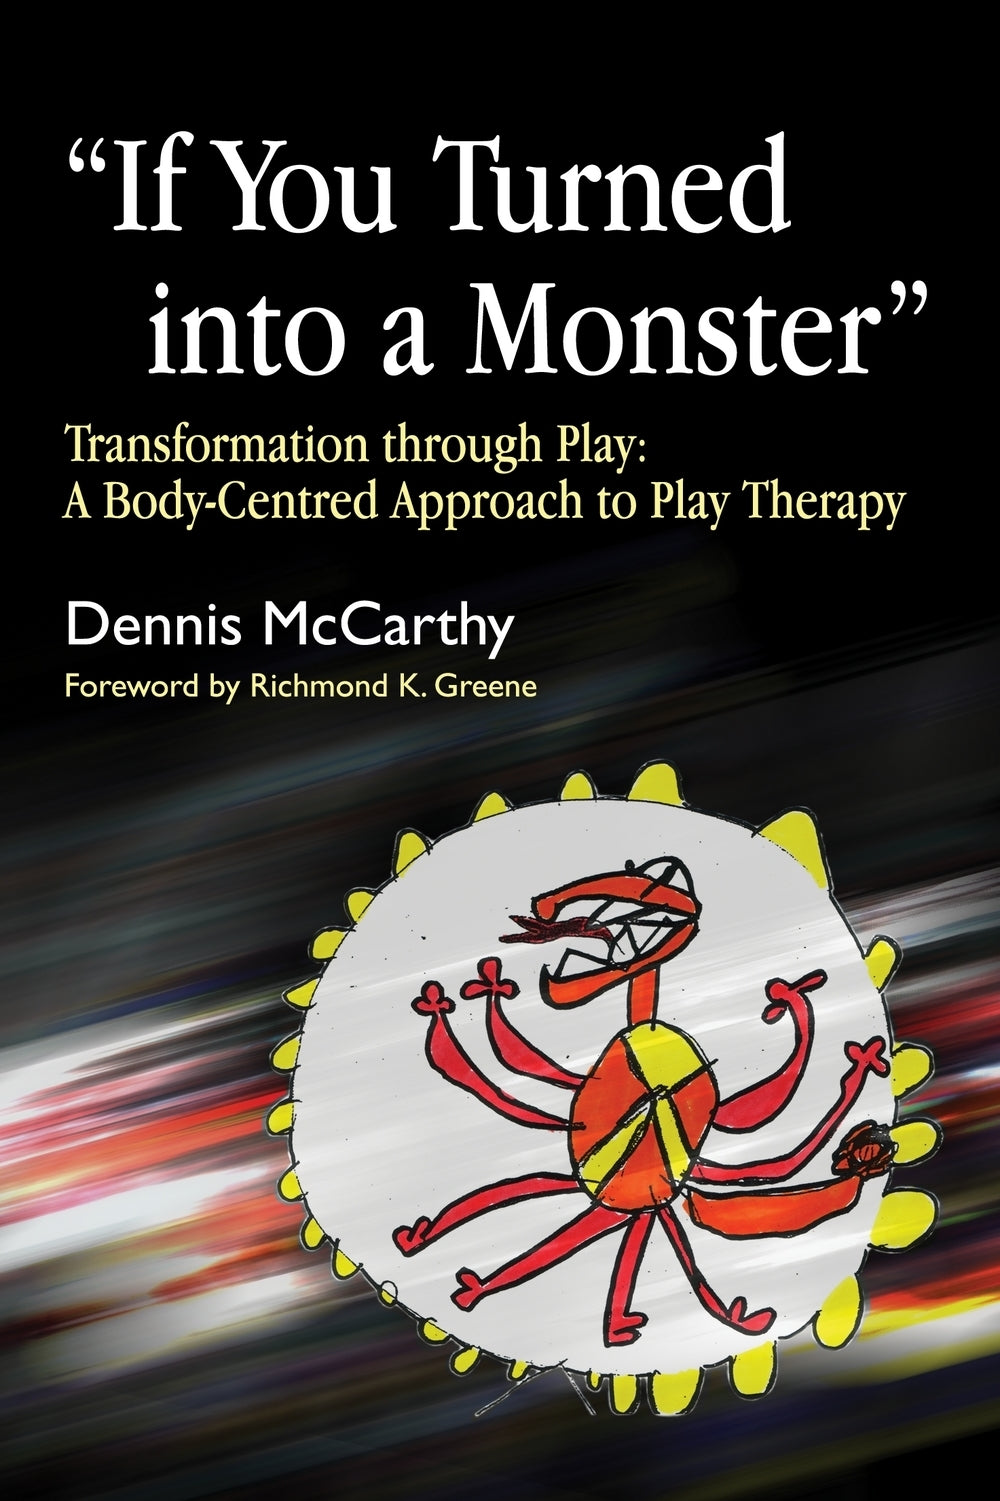 If You Turned into a Monster by Dennis McCarthy